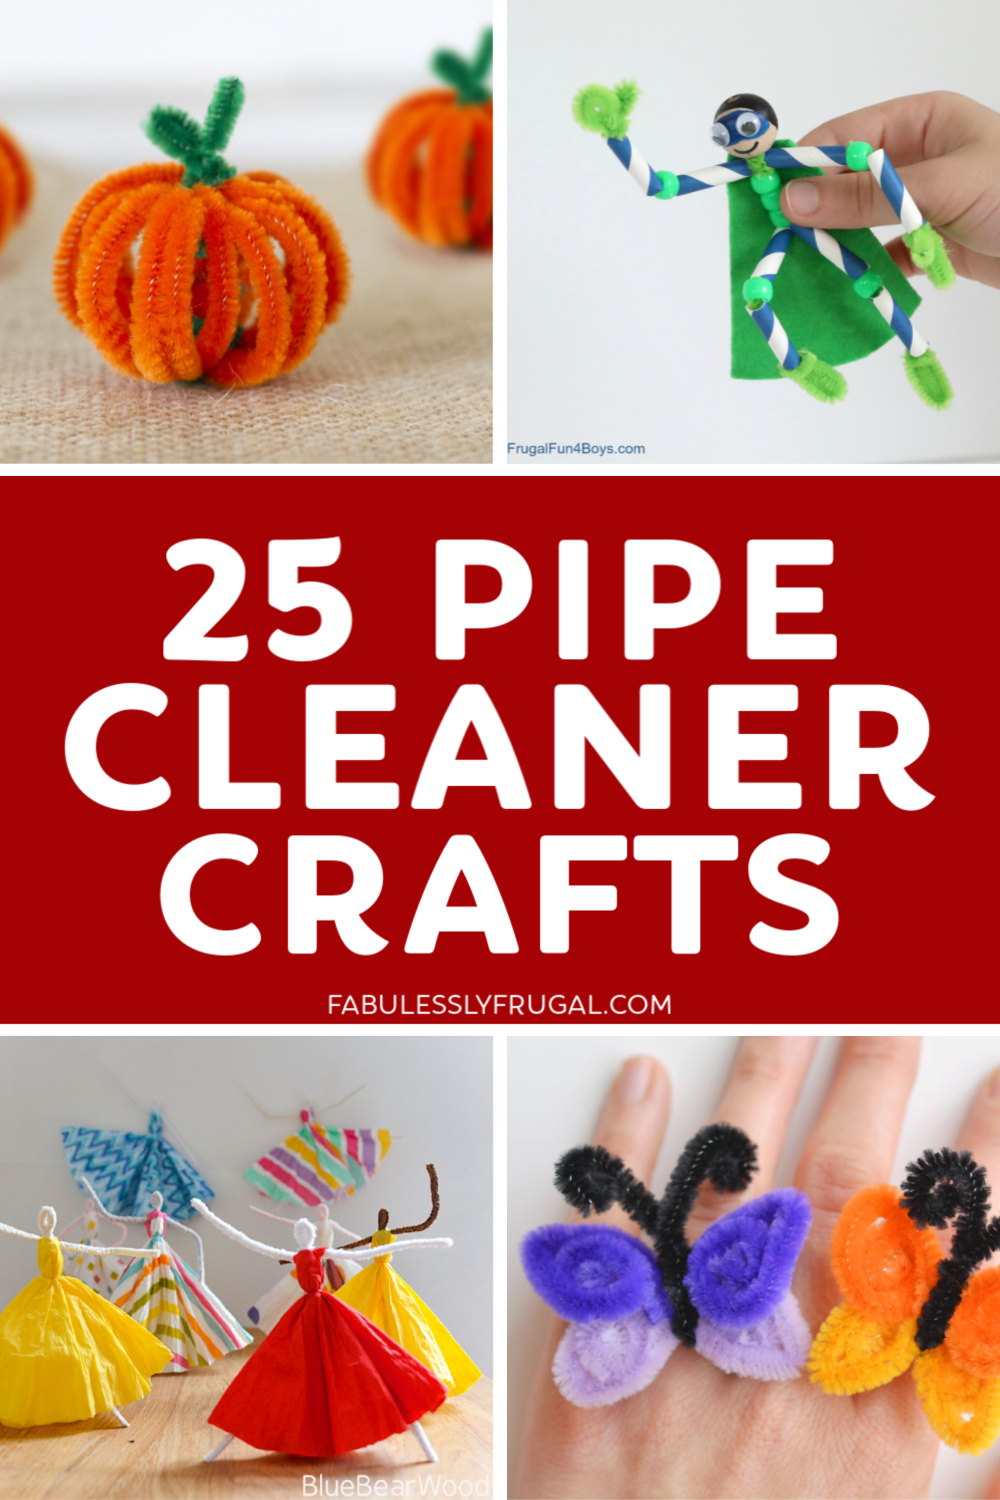 Pipe cleaner crafts for kids